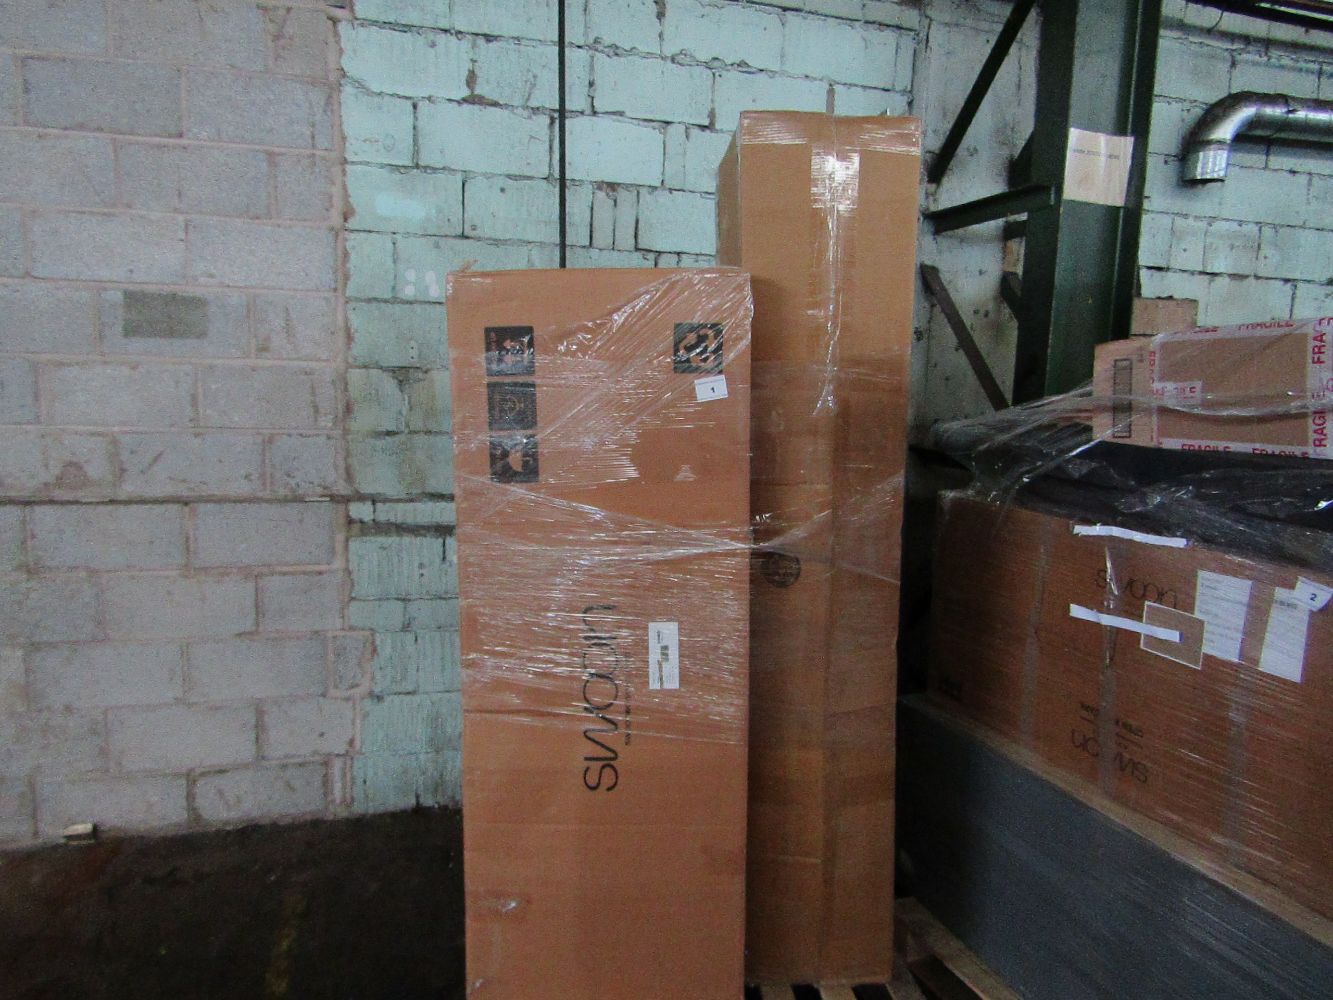 Pallets of unworked Swoon Raw Customer returns, lower starting Prices For one week only, Dont miss out!!!